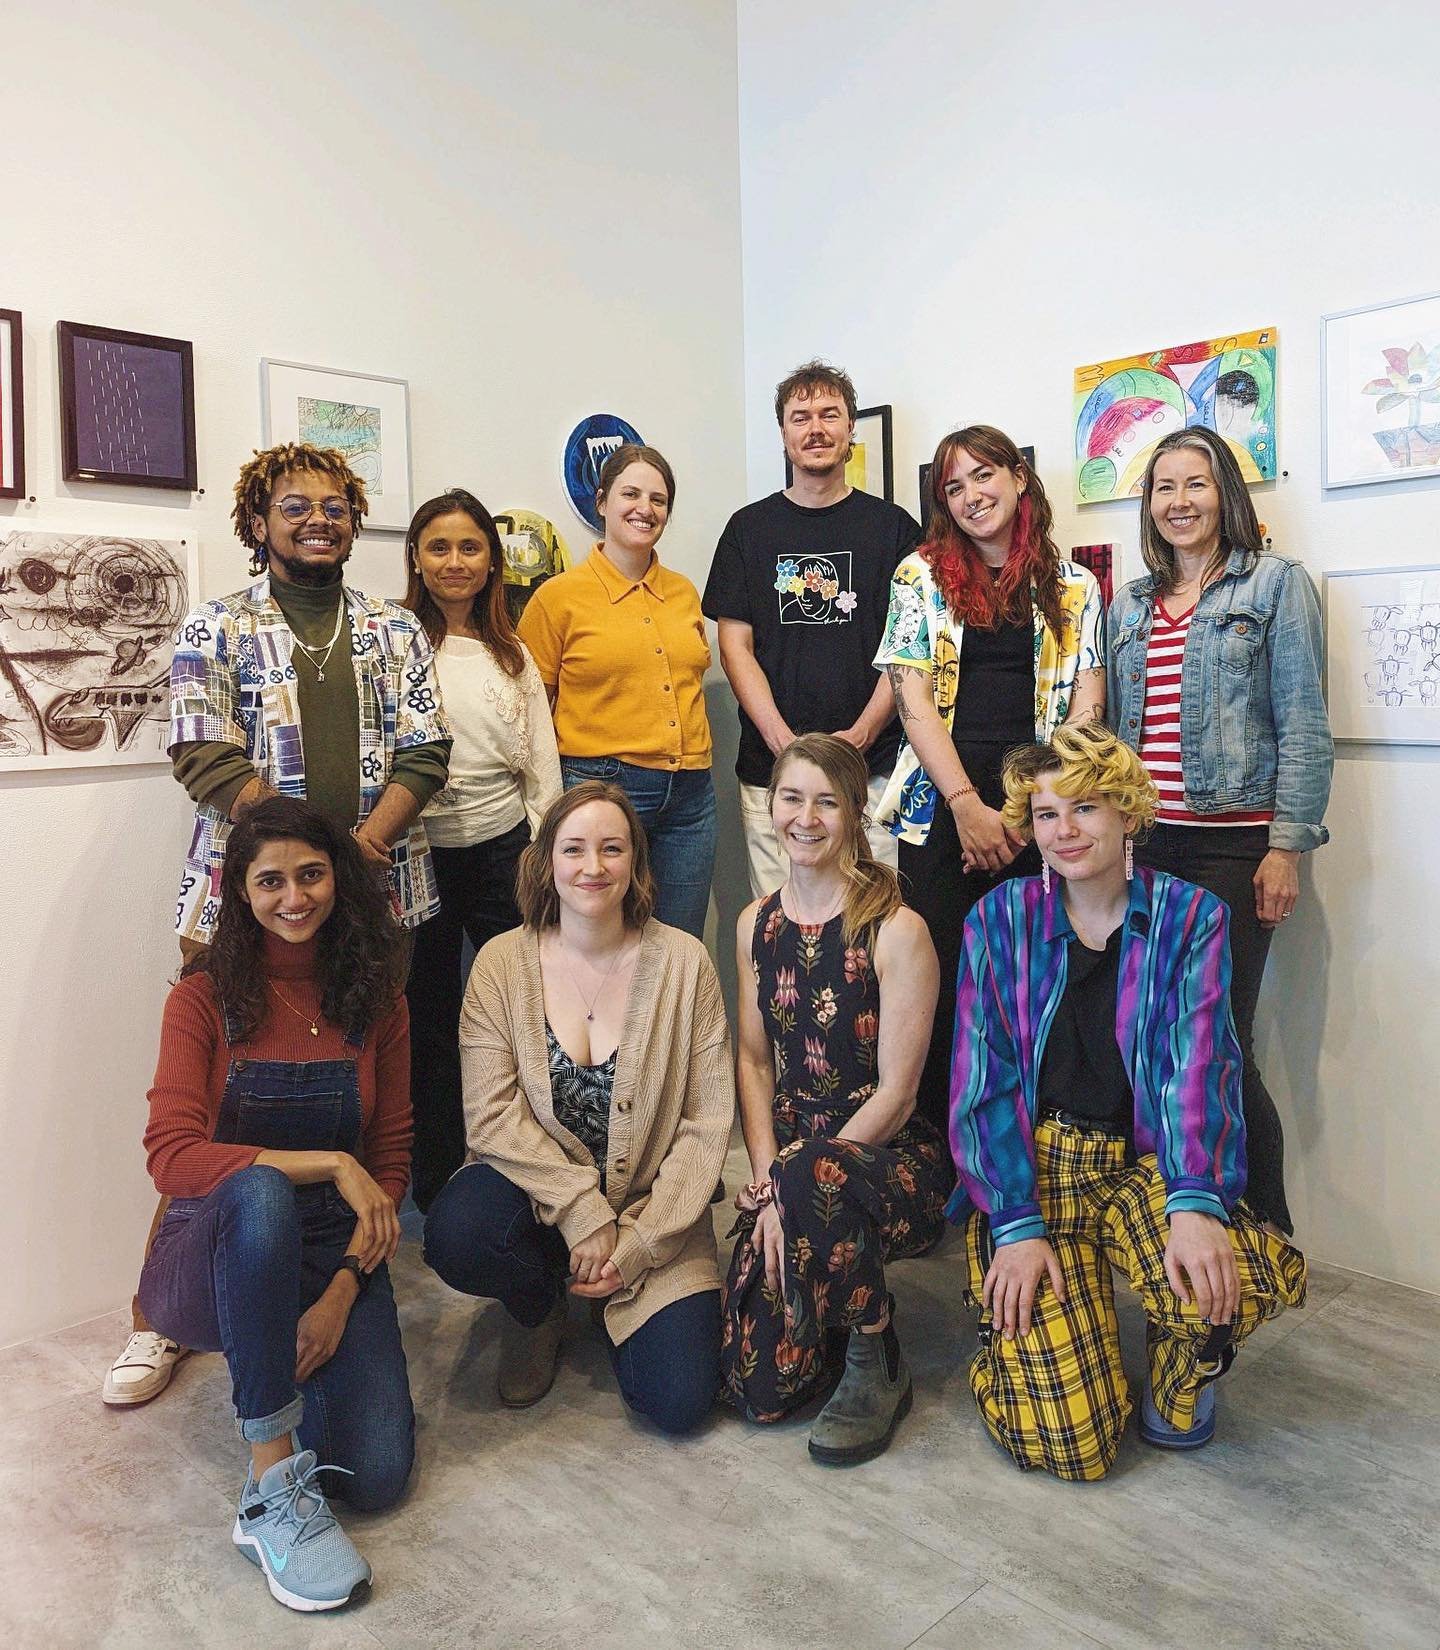 The ArtRecruits team celebrating their collective hard work, alongside the ongoing ArtRecruits exhibition running until May 24th at Studio C!